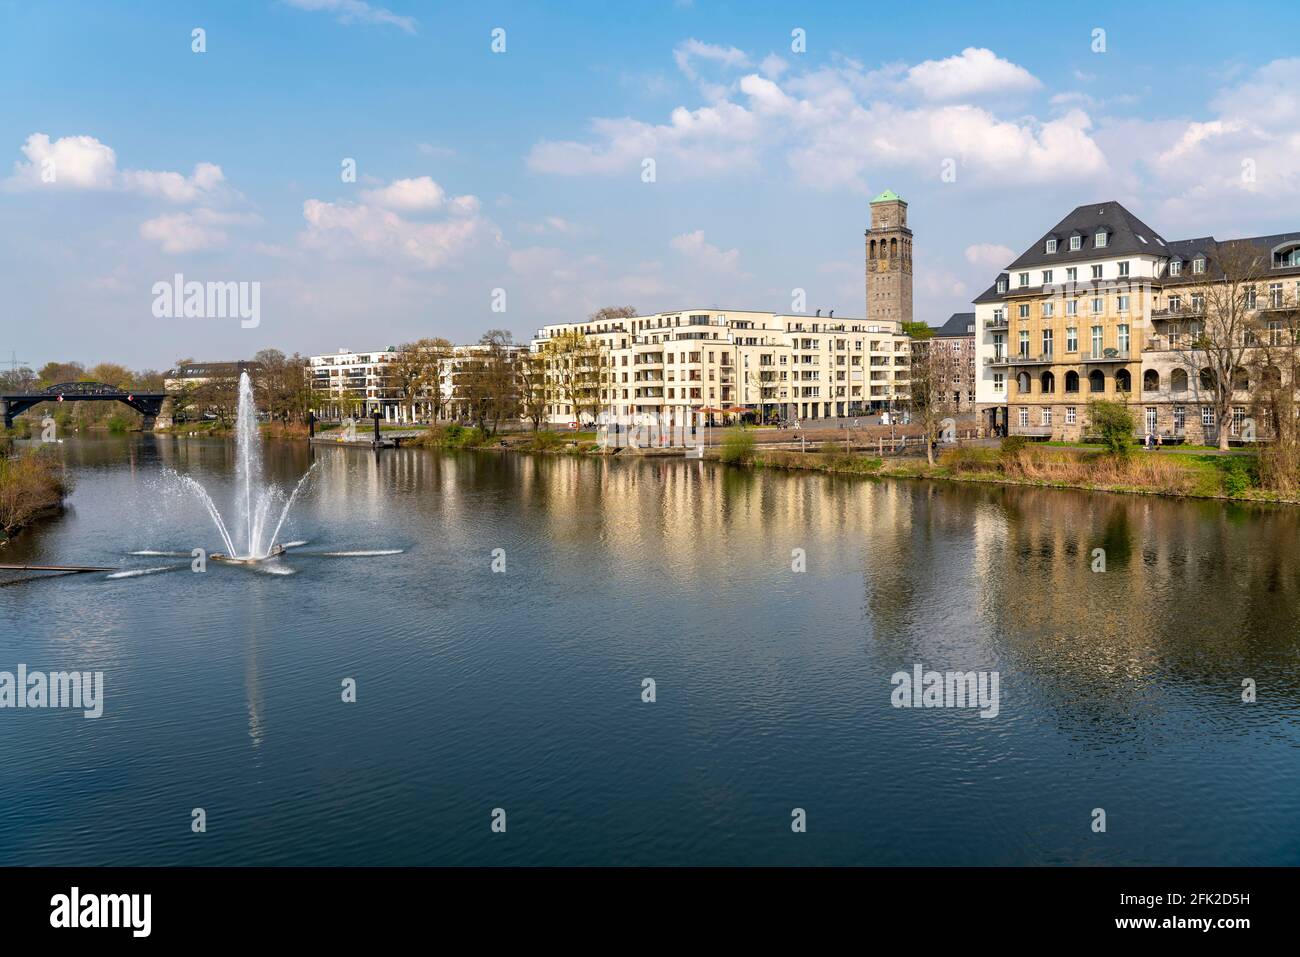 The inner city of Mülheim an der Ruhr, Ruhrpromenade, residential and commercial buildings, gastronomy, new buildings, Ruhrbania project, NRW, Germany Stock Photo